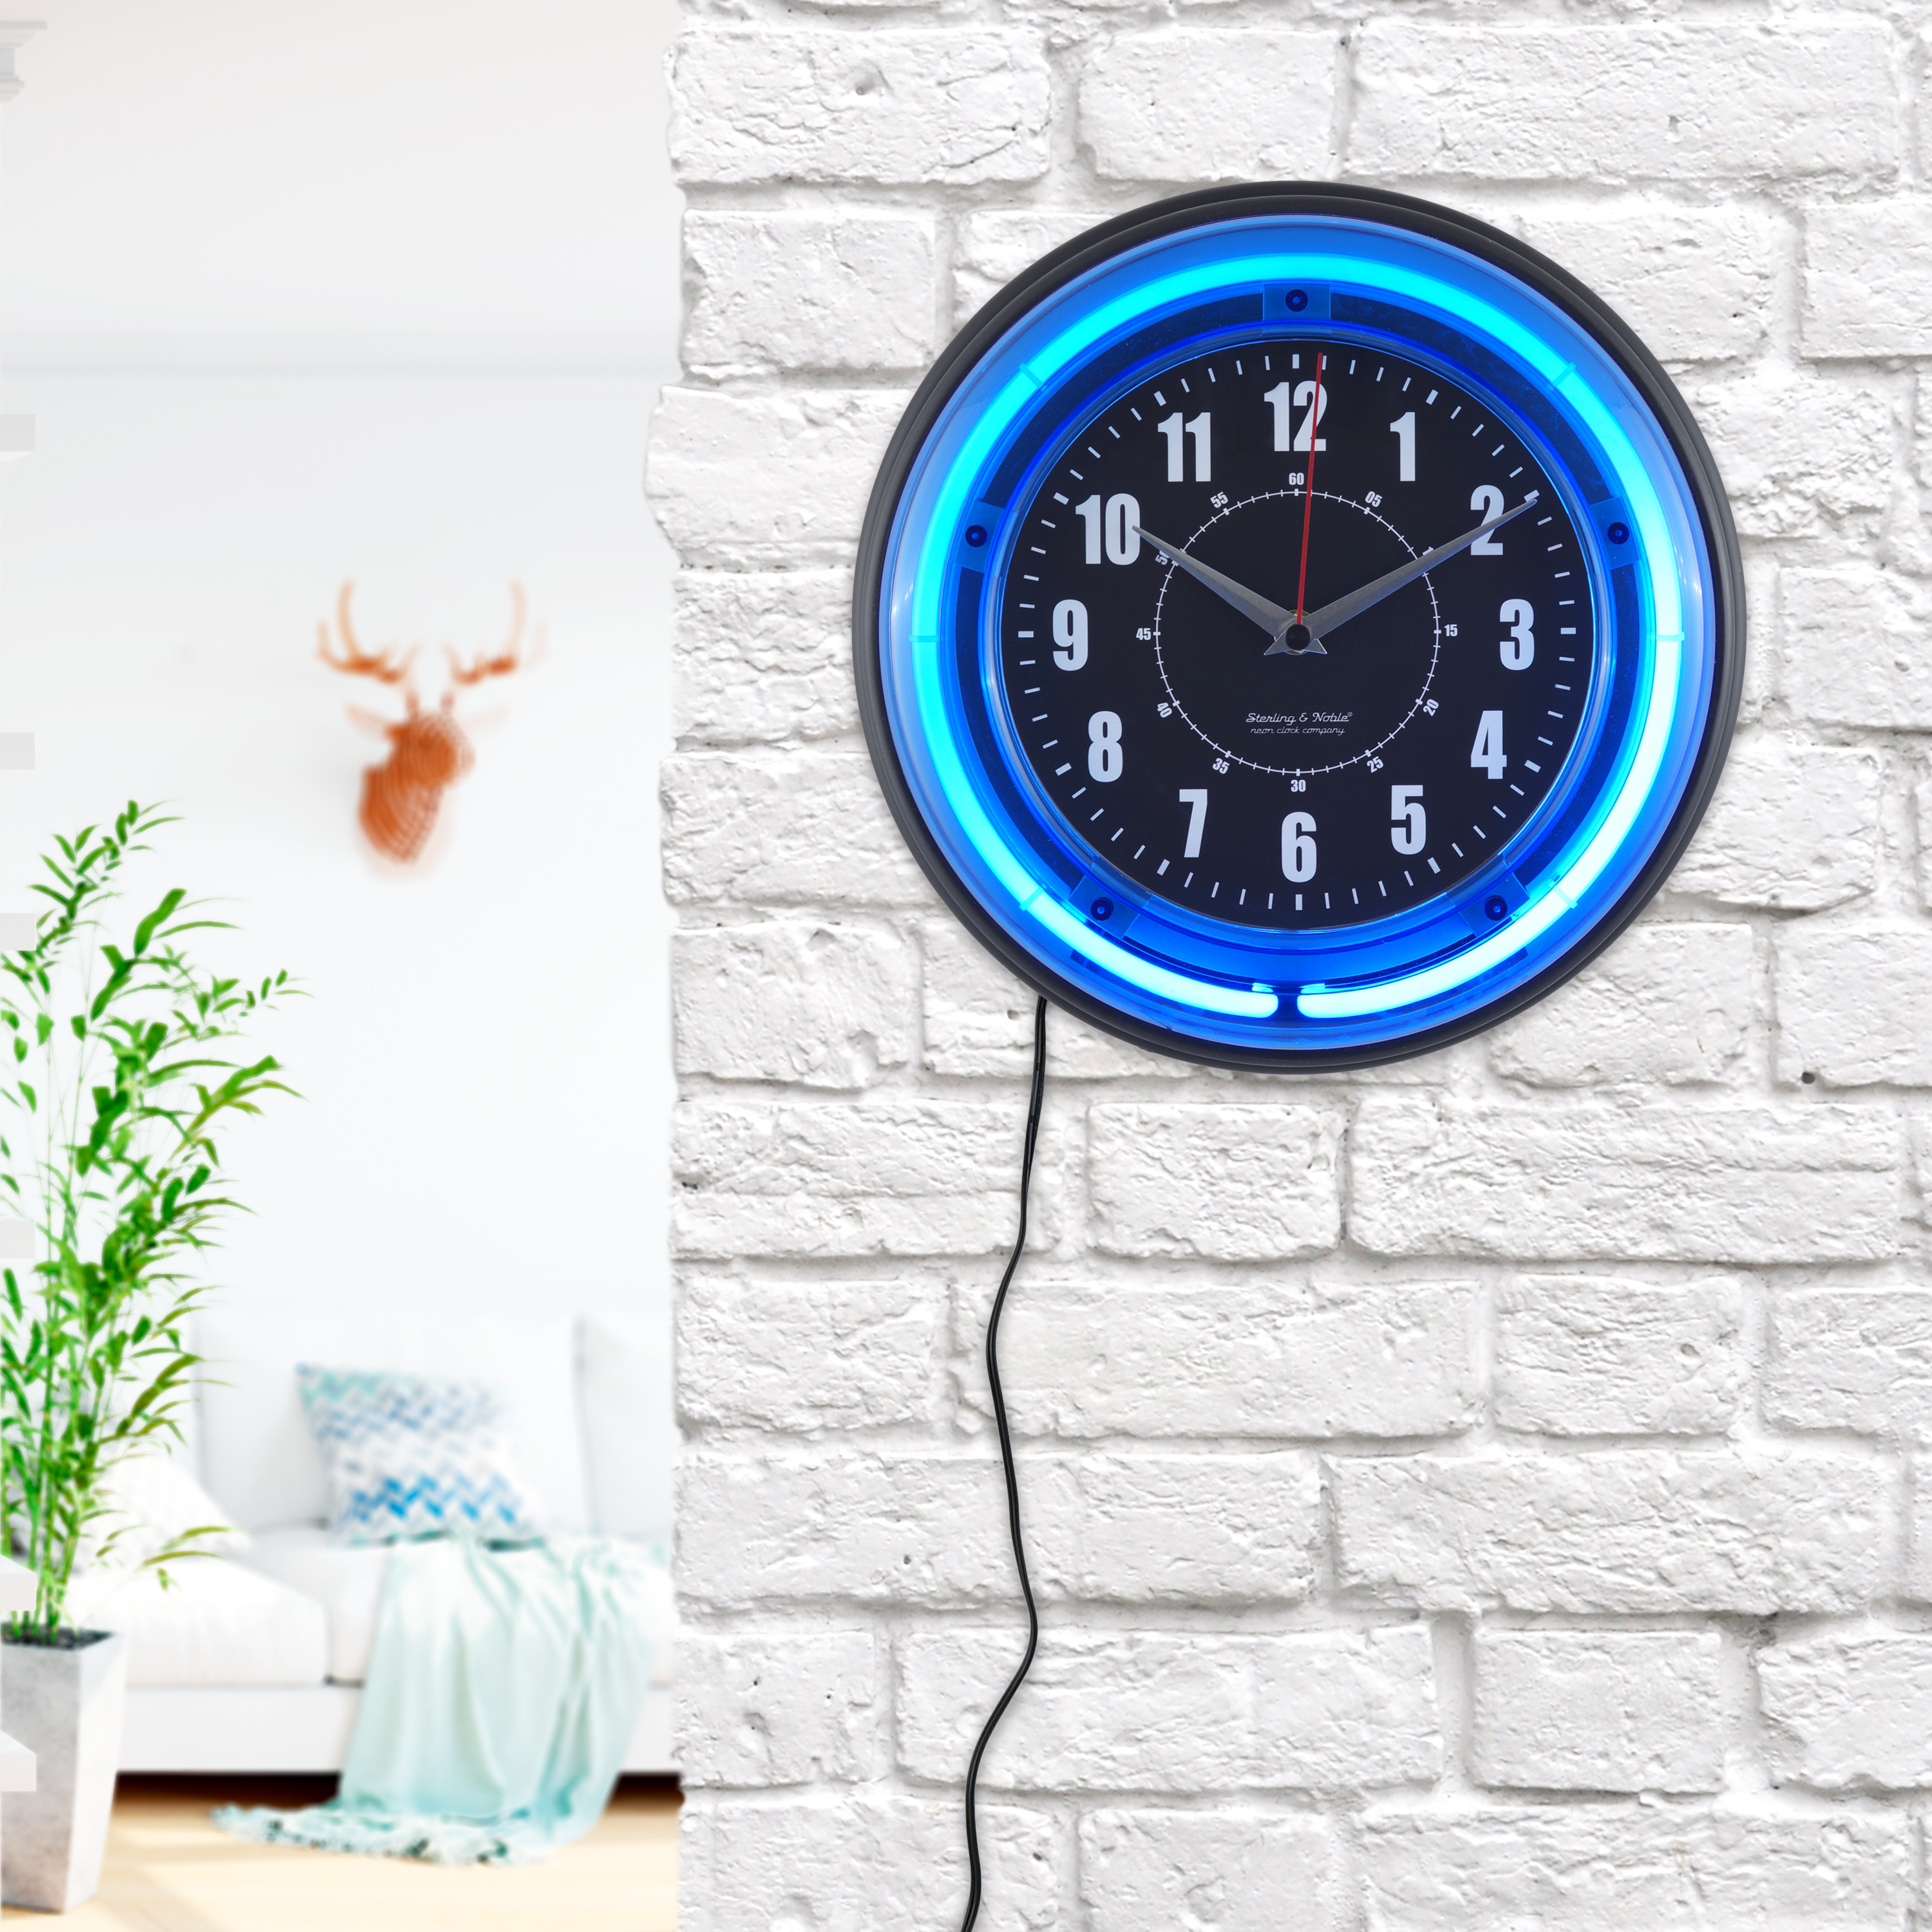 Sterling and Noble 11" Vibrant Blue Neon Analog Wall Clock - image 4 of 10